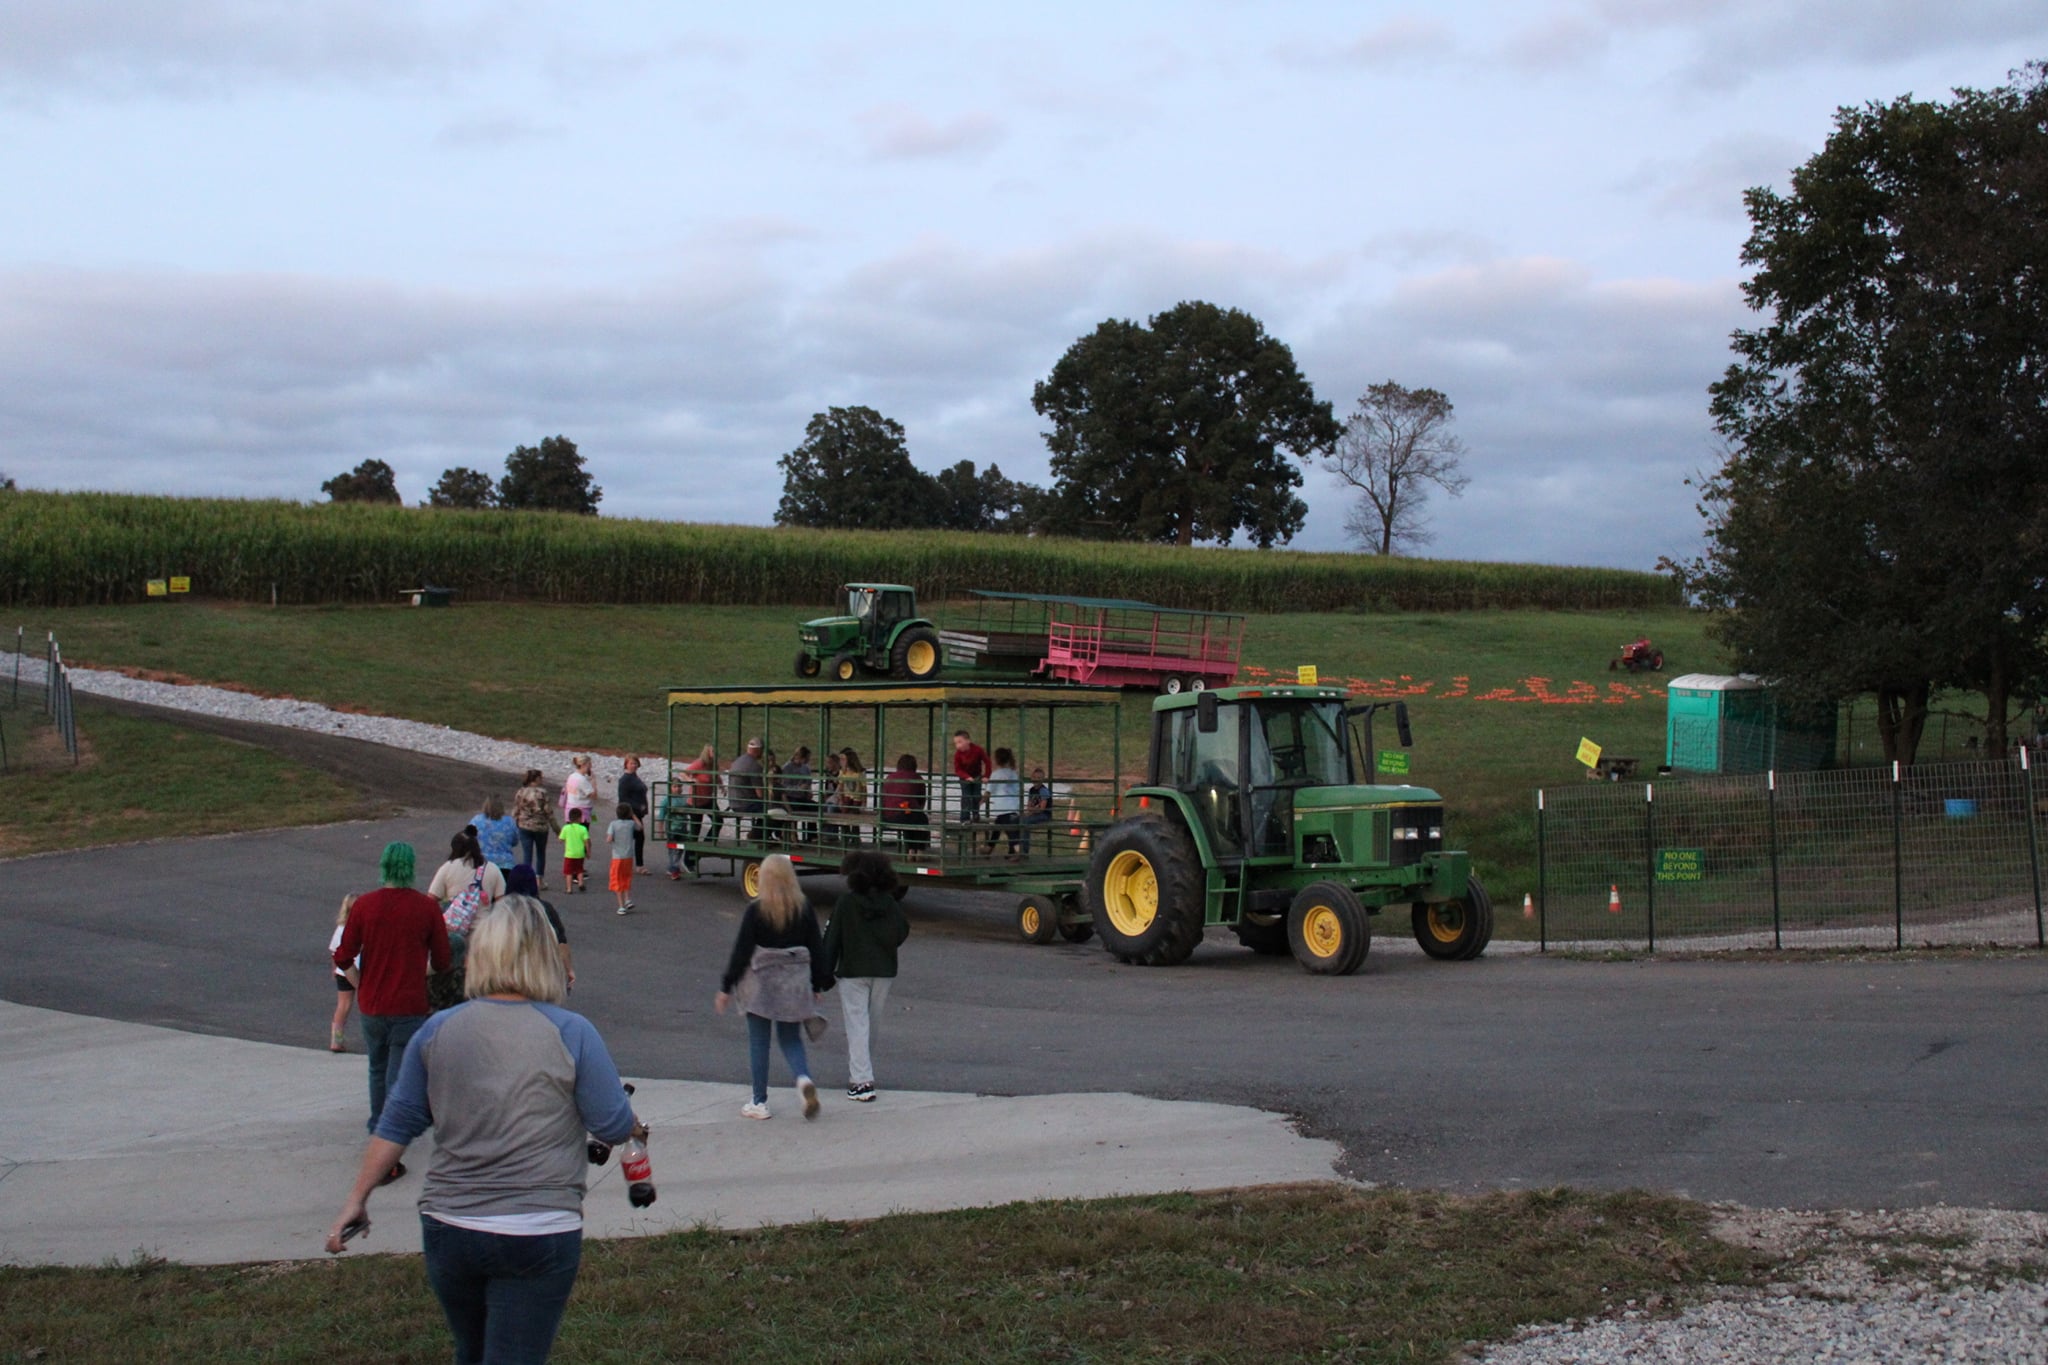 Families get ready to take a ride around Johnny Wilson Farm during fall 2021. There's a pumpkin patch, corn maze and tractors parked outside.